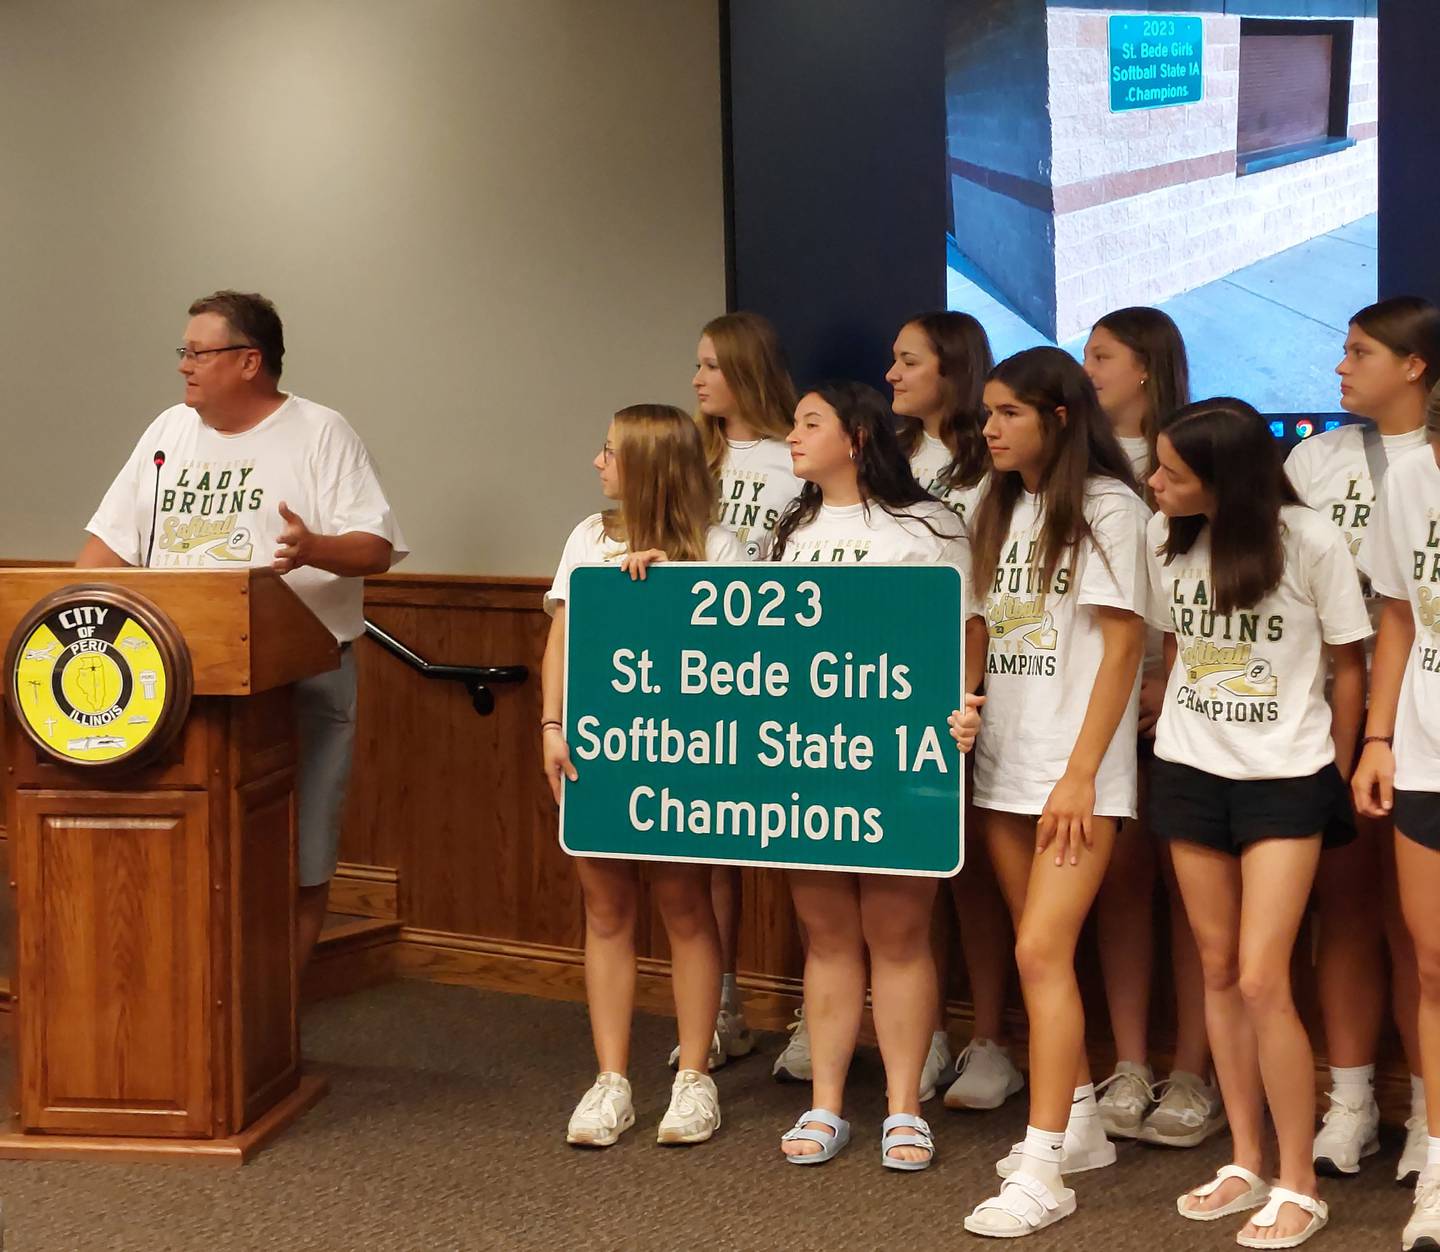 St. Bede softball coach Shawn Sons talks about the team's champions run Wednesday, July 5, 2023, as it was honored by the Peru City Council with a sign.